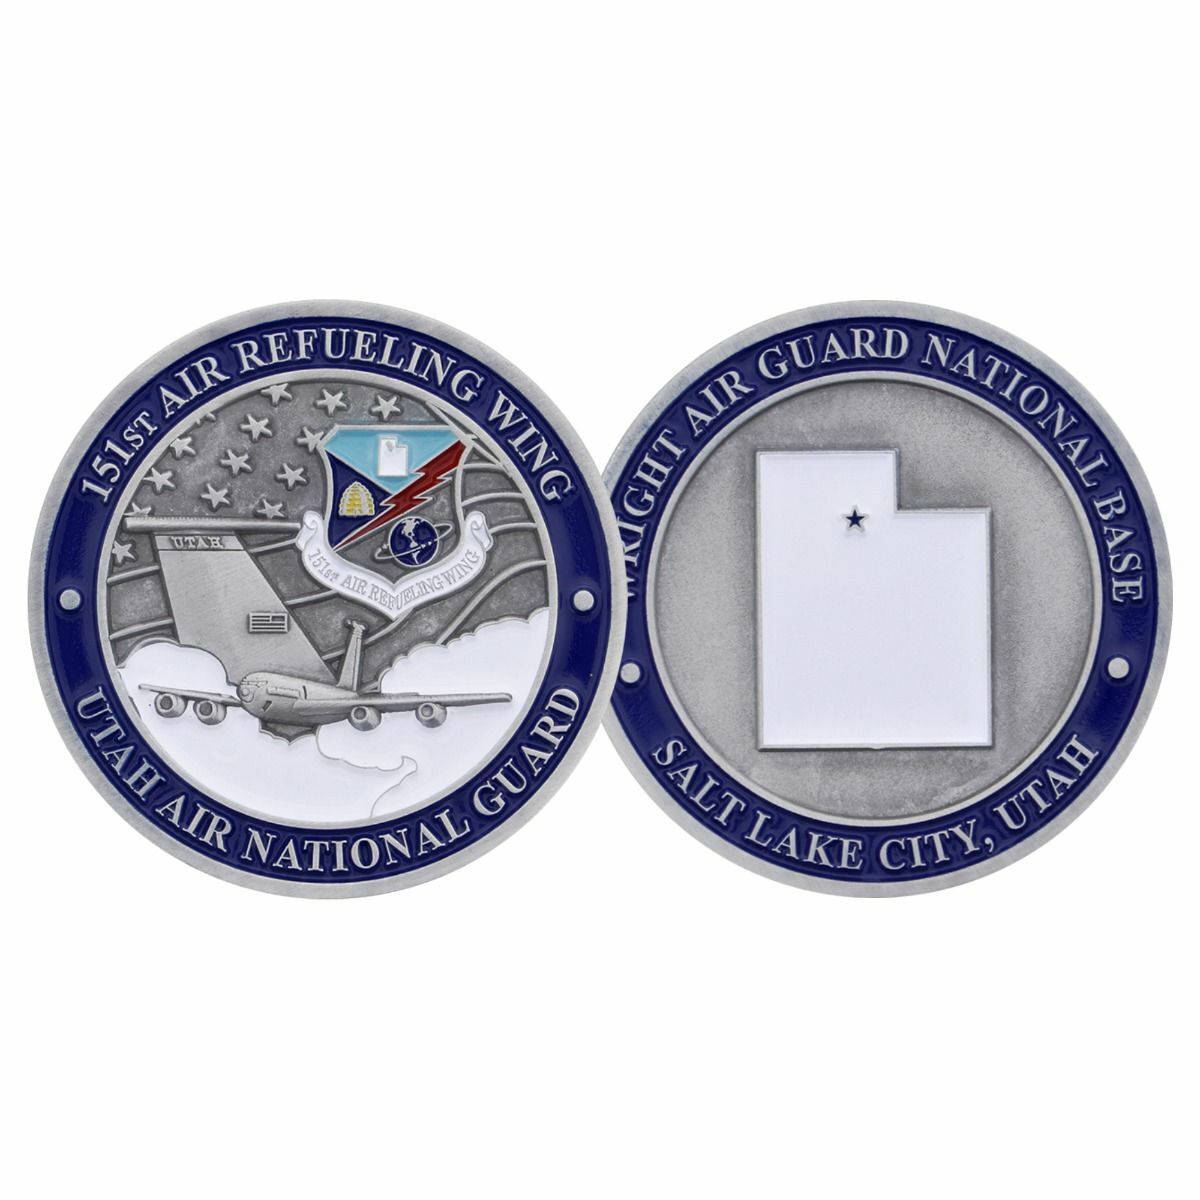 Primary image for WRIGHT UTAH AIR NATIONAL GUARD REFUELING WING AIR FORCE  1.75" CHALLENGE COIN